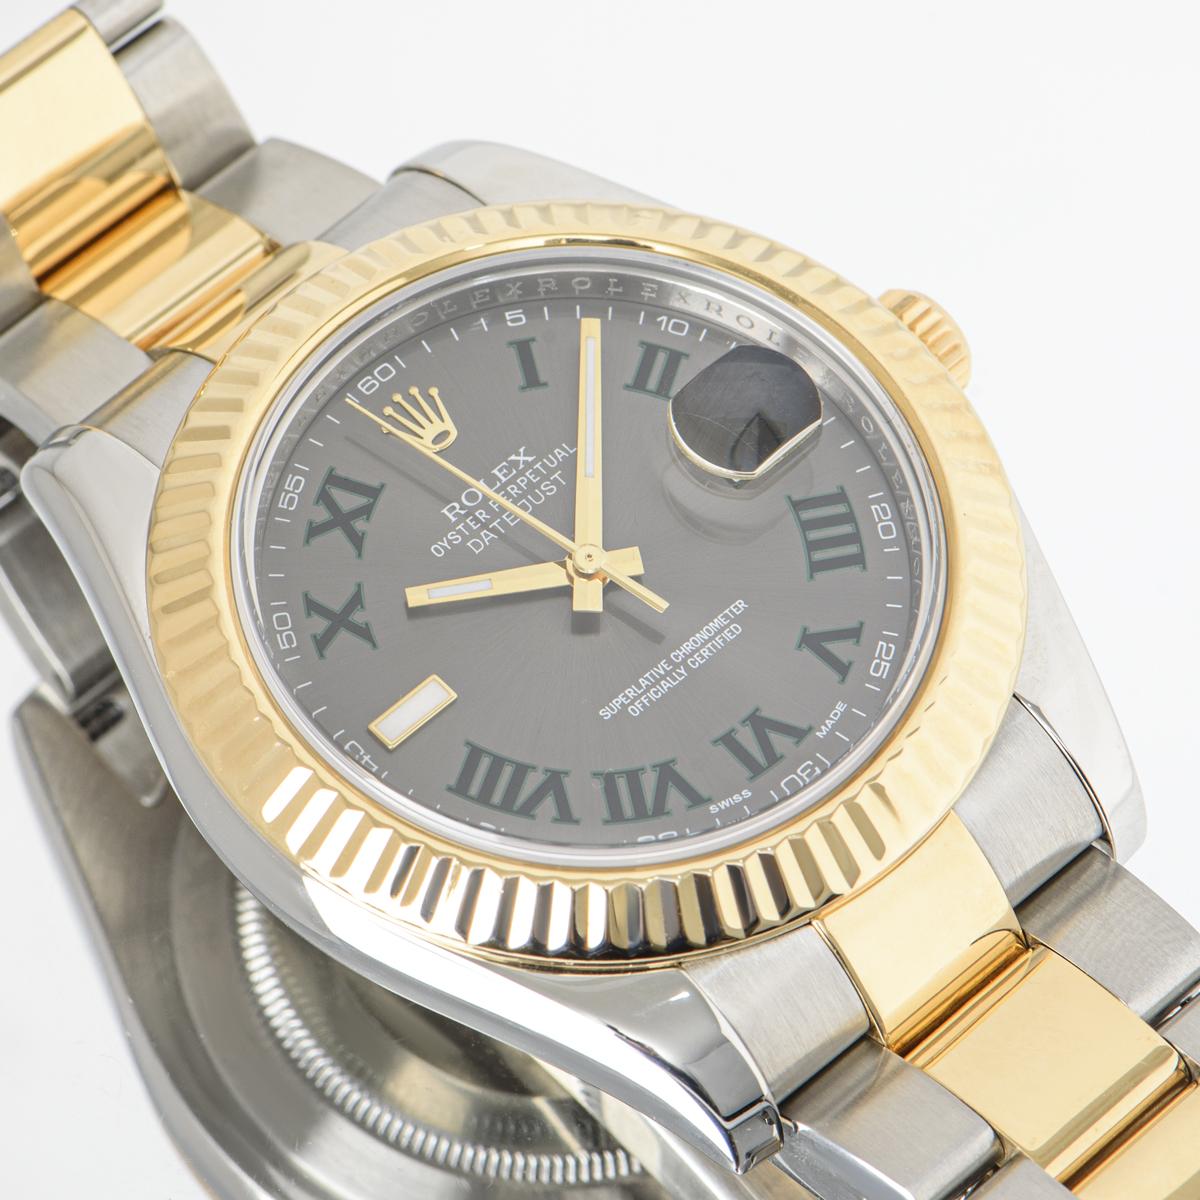 A 41mm Datejust II in Oyster steel and yellow gold by Rolex, featuring a Wimbledon dial and a fluted yellow gold bezel. The Oyster bracelet comes with a folding Oyster clasp. Fitted with scratch-resistant sapphire crystal and a self-winding